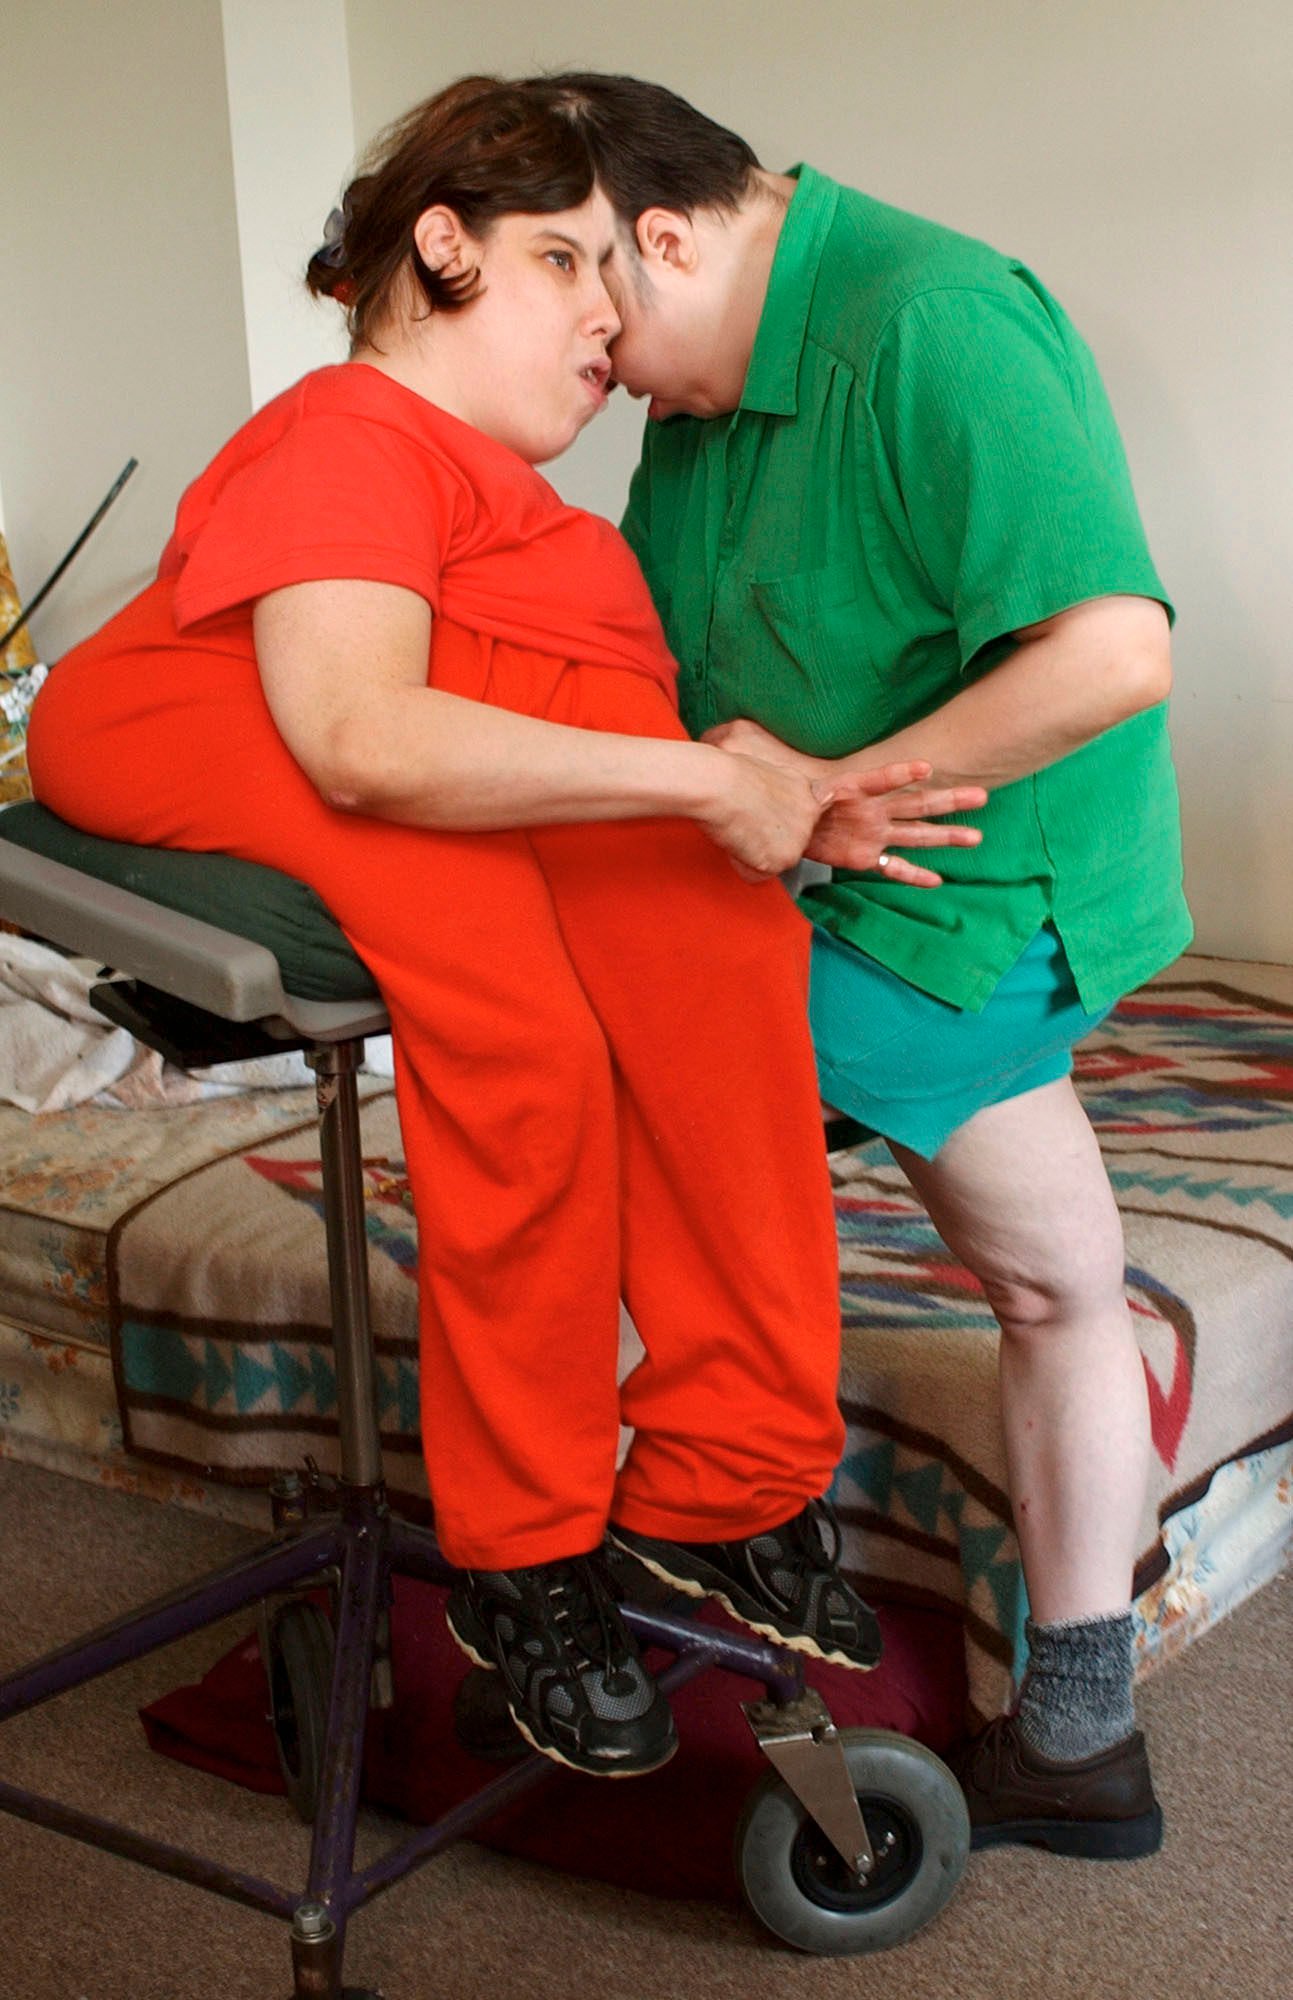 Lori and George Schappell were the oldest living conjoined twins as per the Guinness World Records. Photo: AP